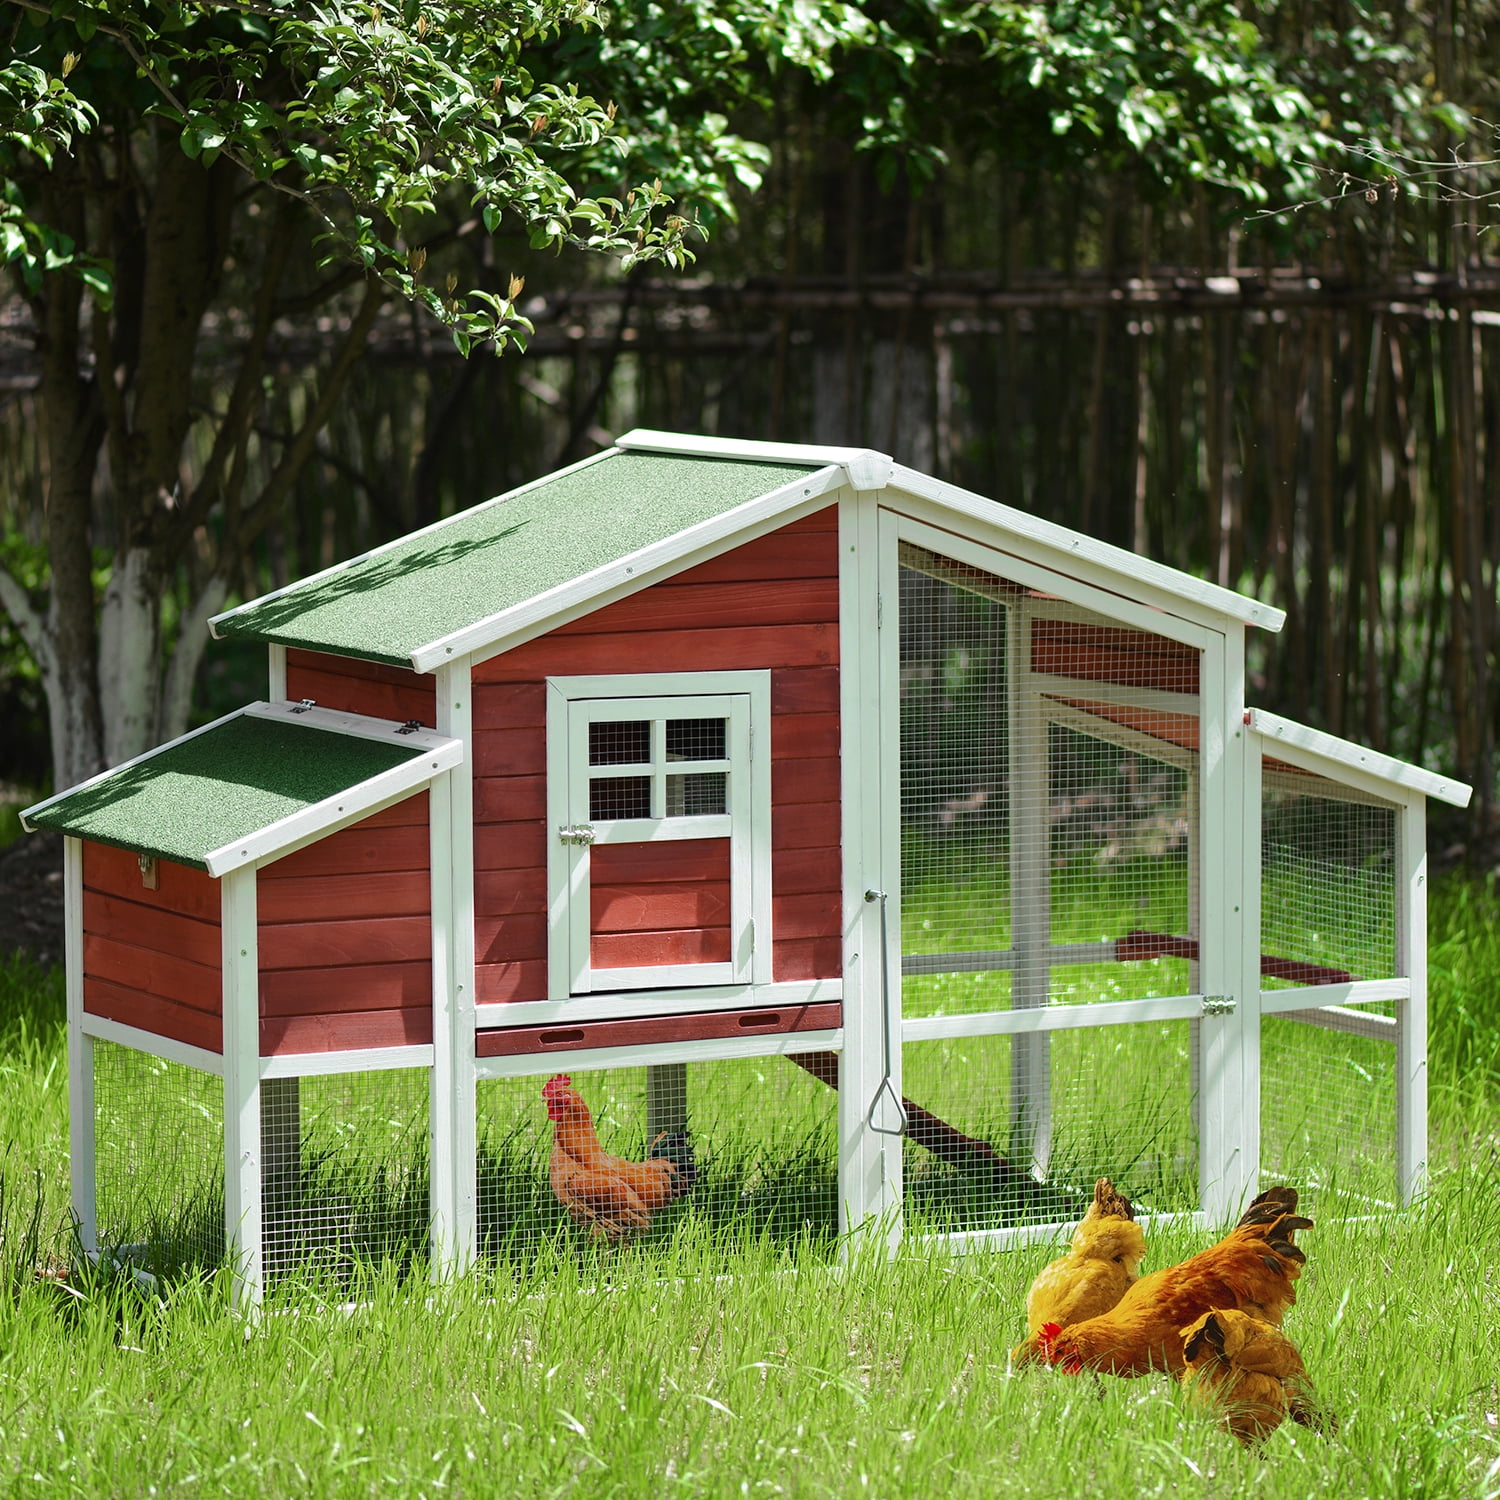 Chicken Coop High Frame Design Solid Wood Construction Tangkula Rabbit Hutch Easy to Clean Slide-Out Tray Ideal for Bunny Cage Waterproof Roof 